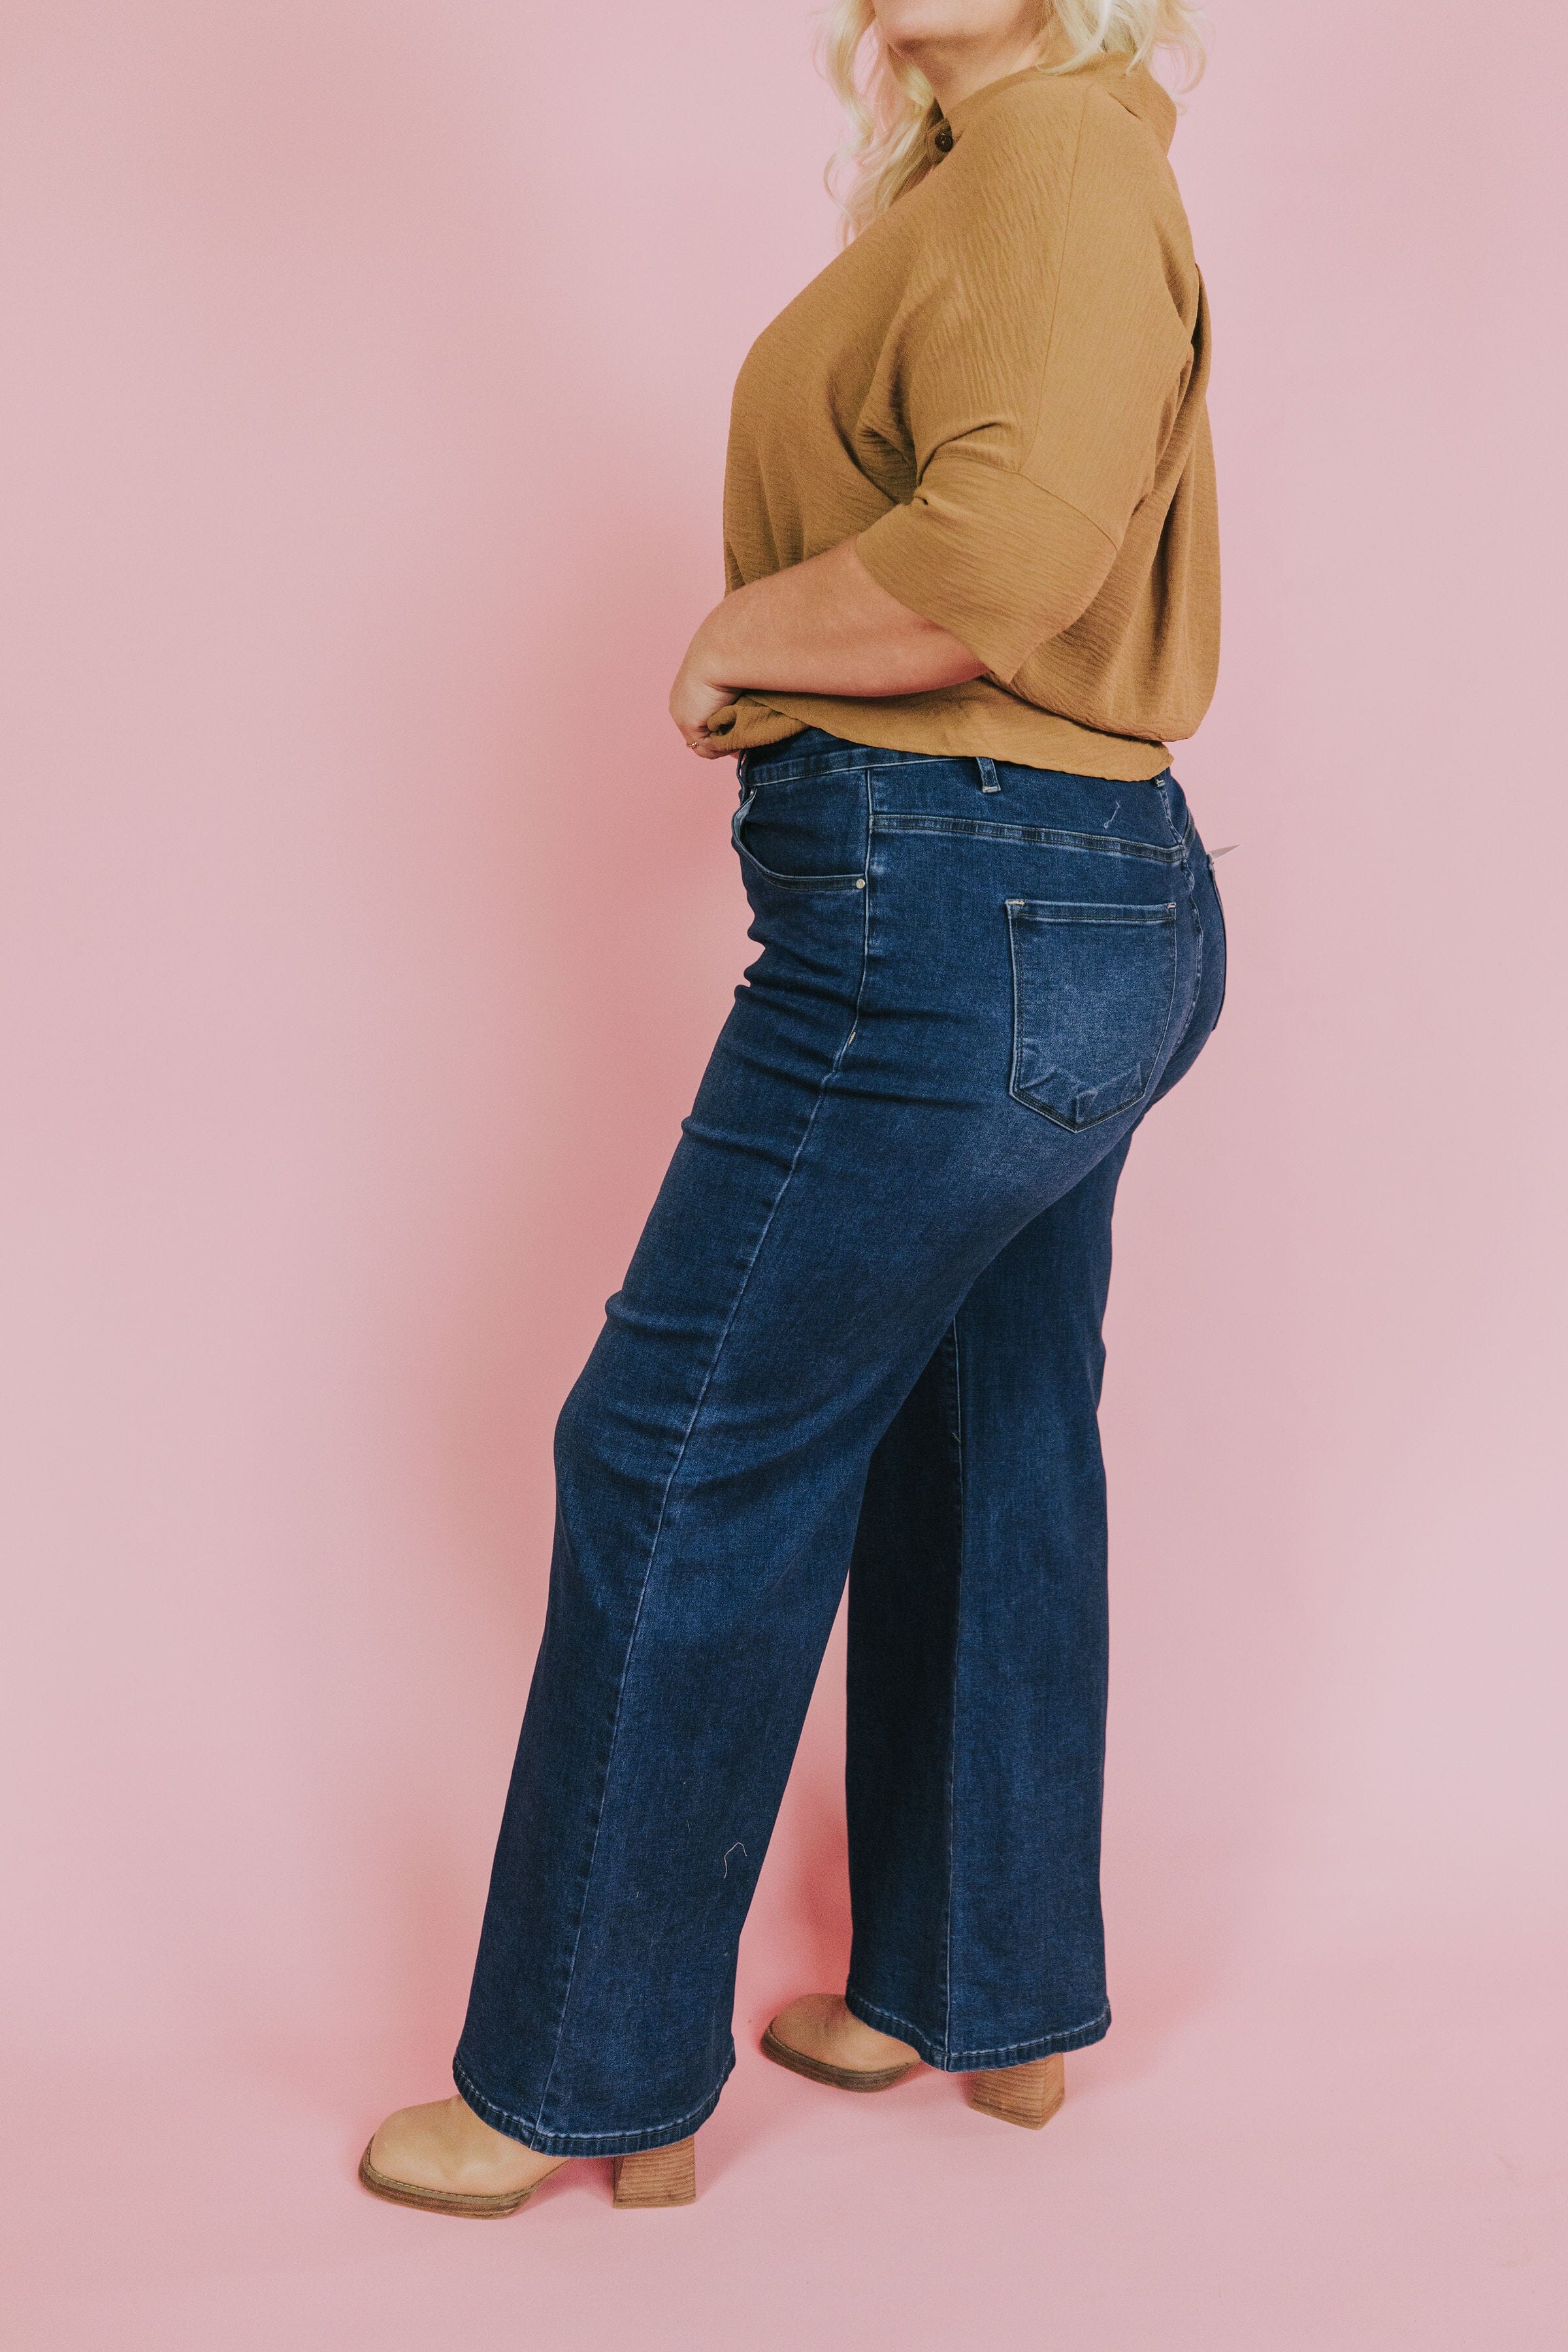 PLUS SIZE - Staring At You Jeans